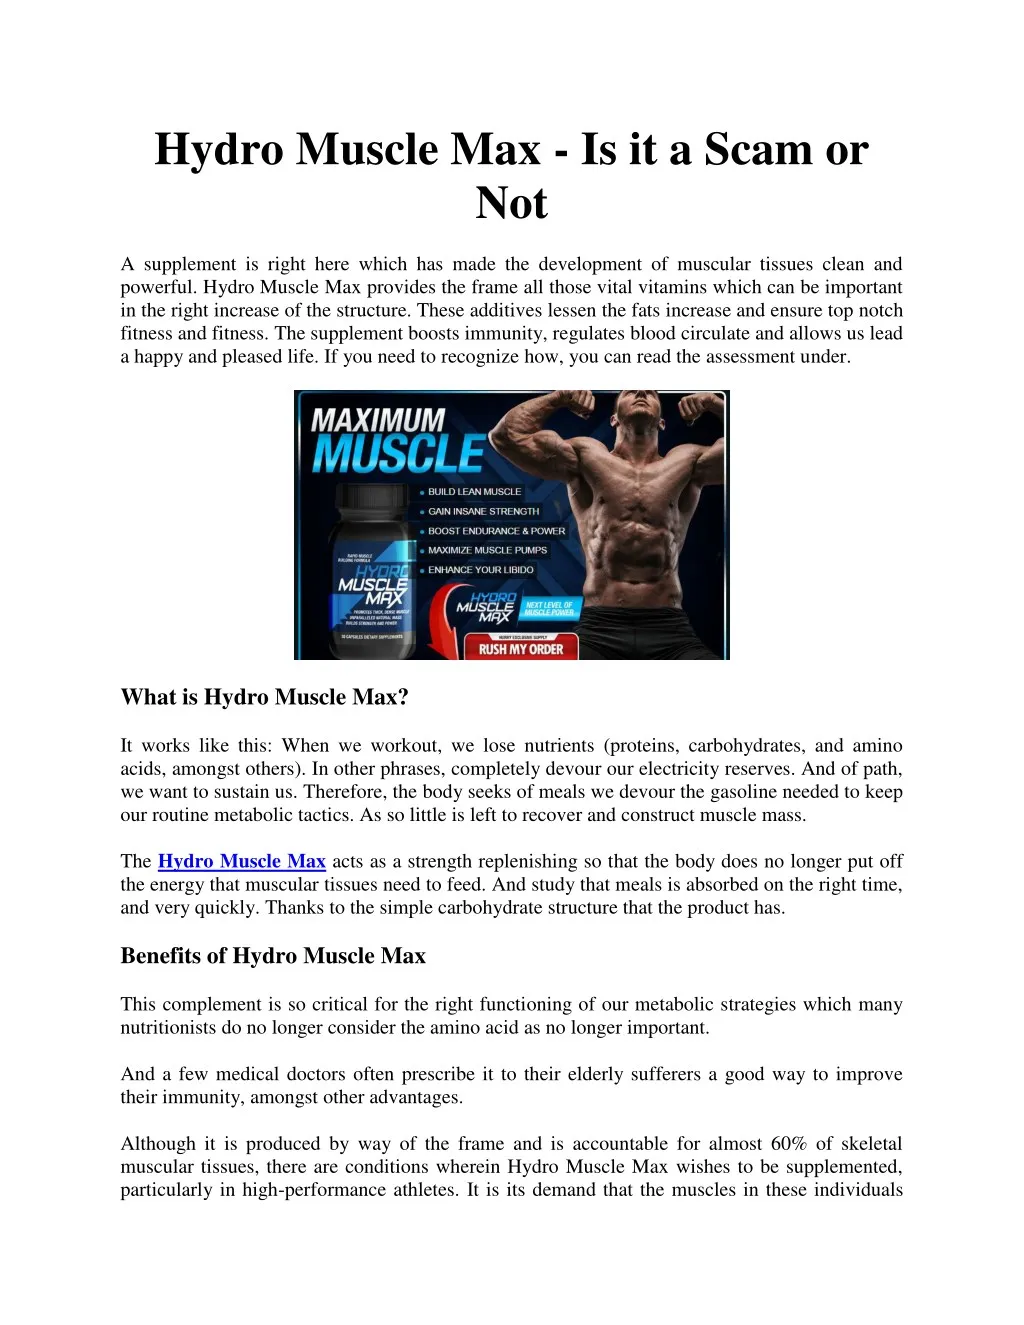 hydro muscle max is it a scam or not